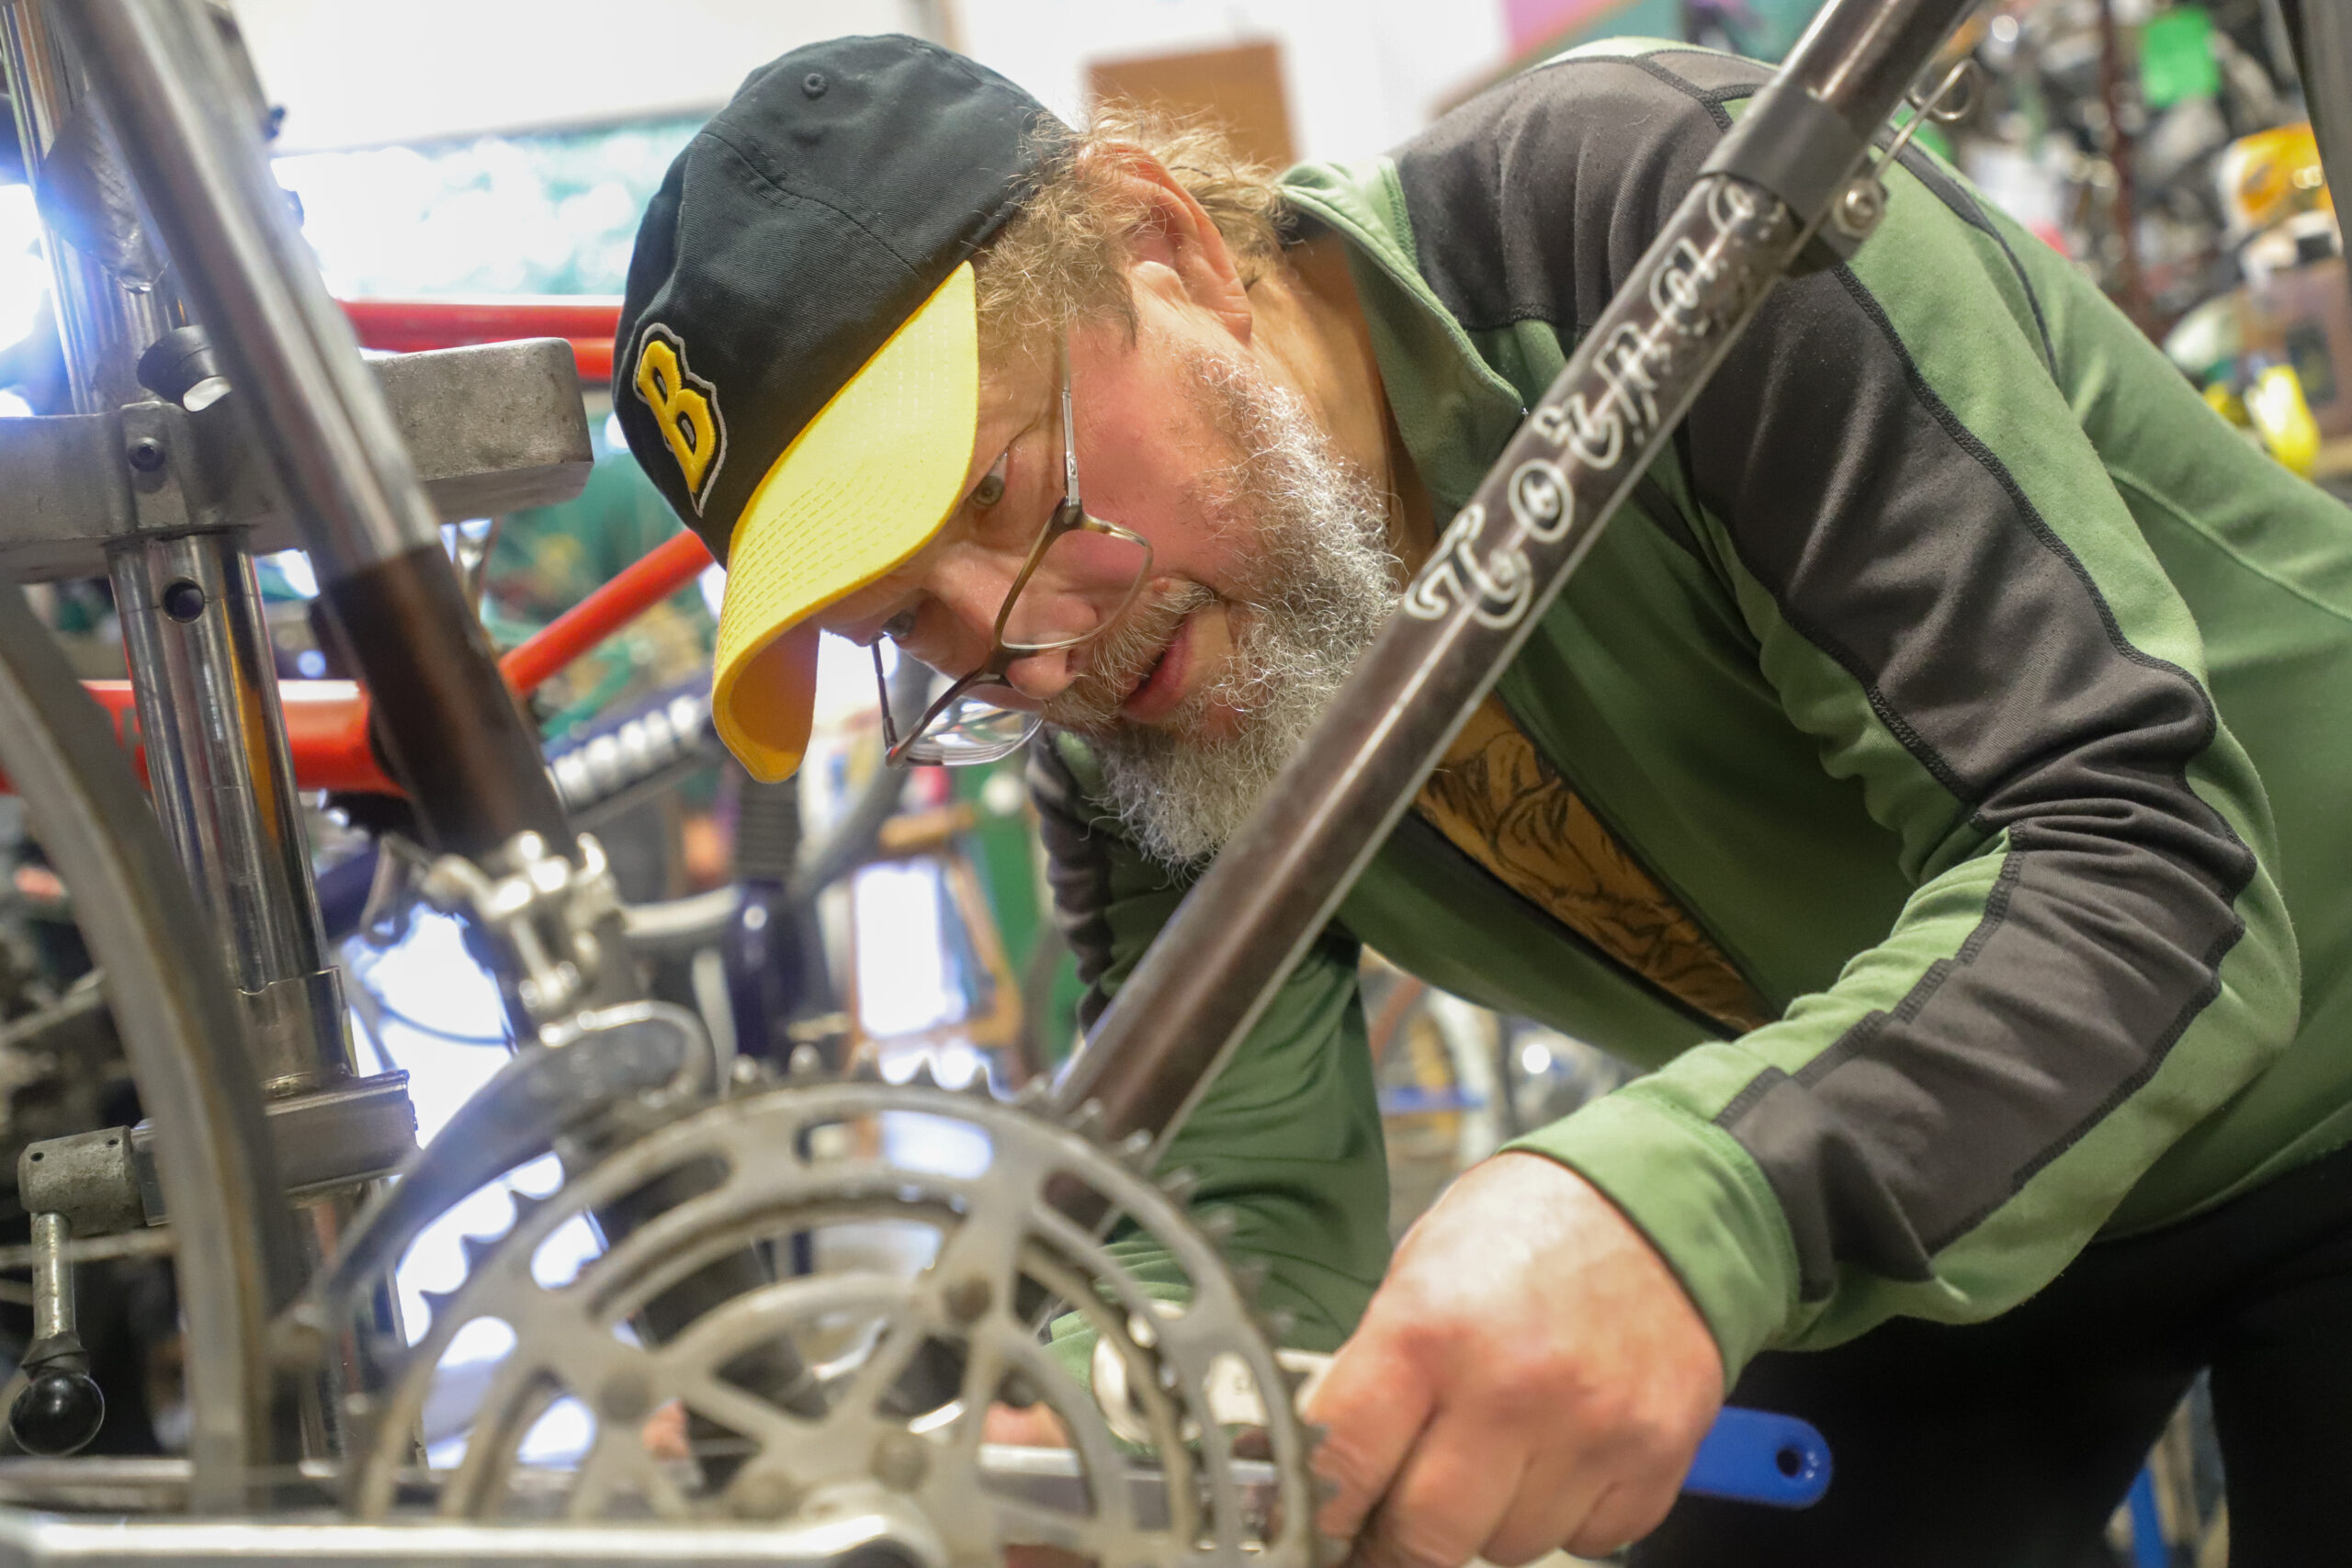 A man with glasses and a beard leans over a bike, and looks at its gears.